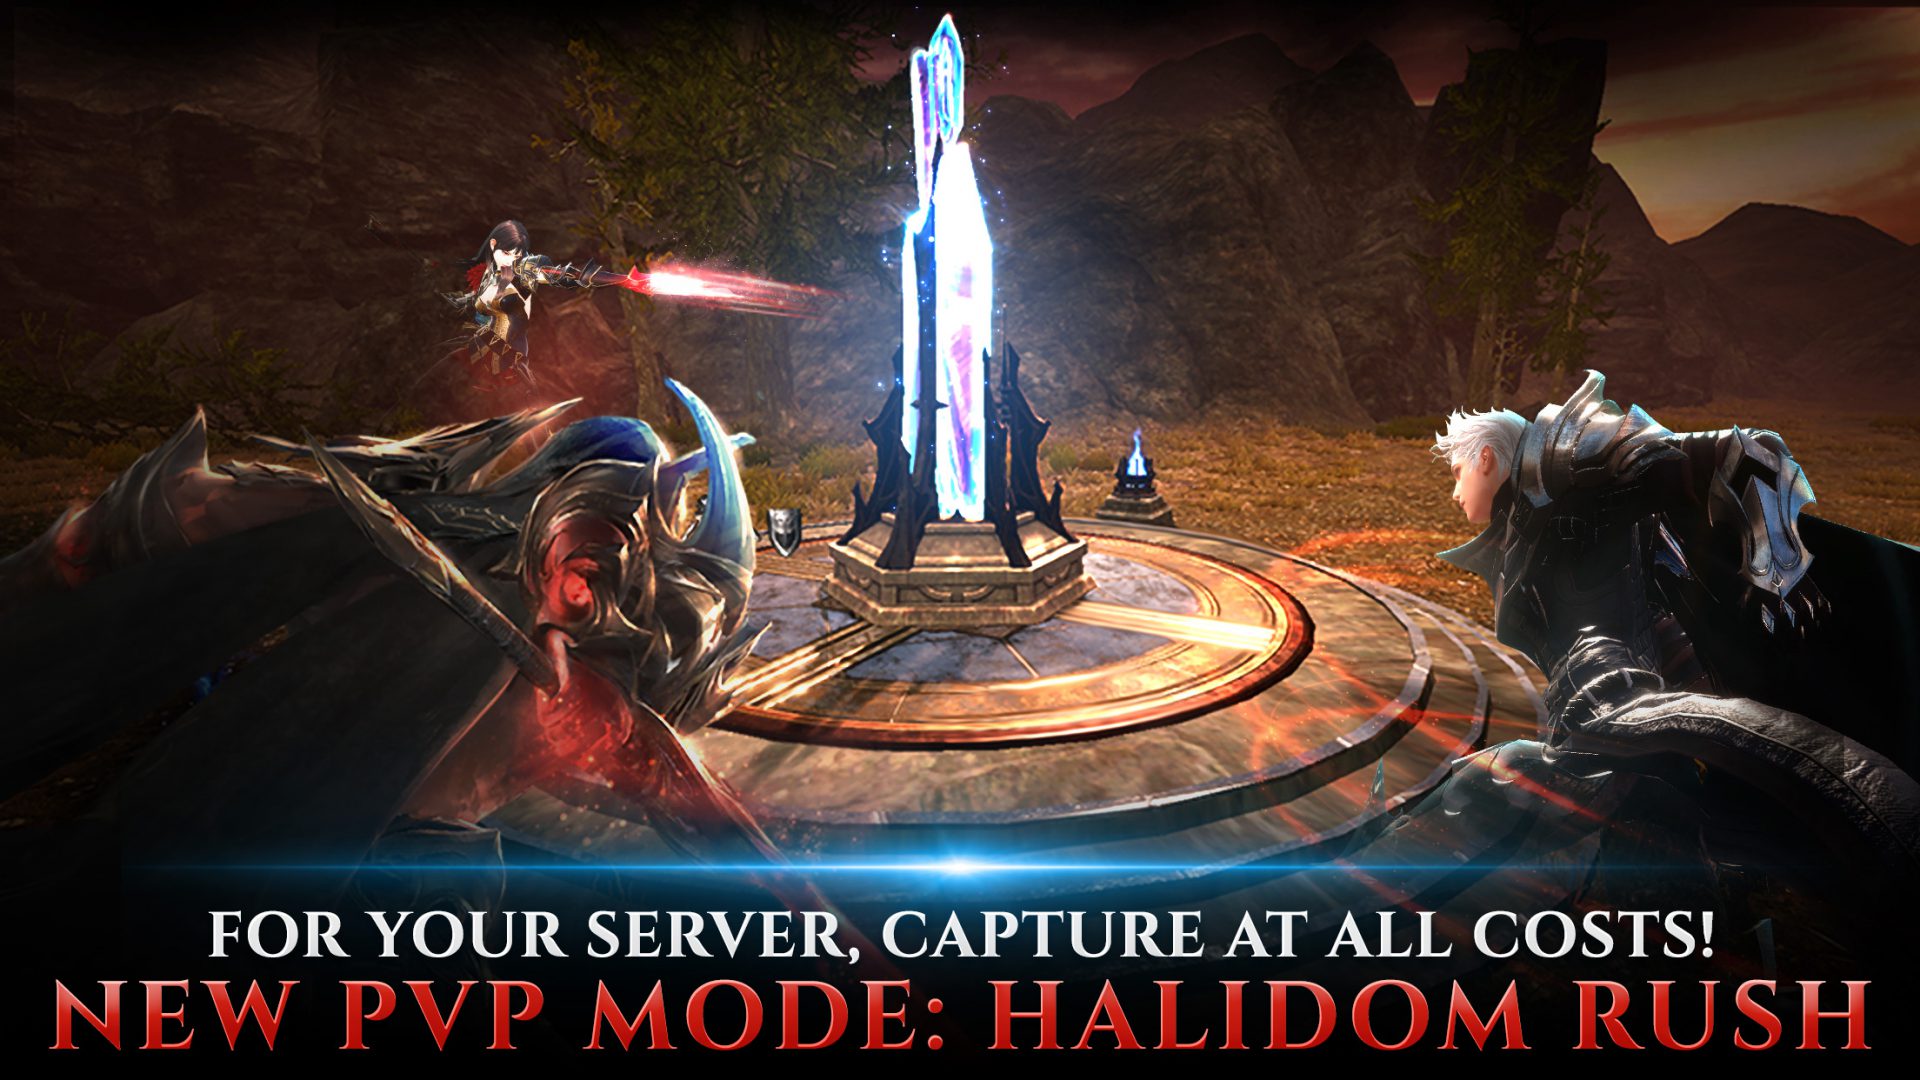 Experience All New Pvp Action In V4 Halidom Rush On October 7 Games Predator - pvp mode roblox